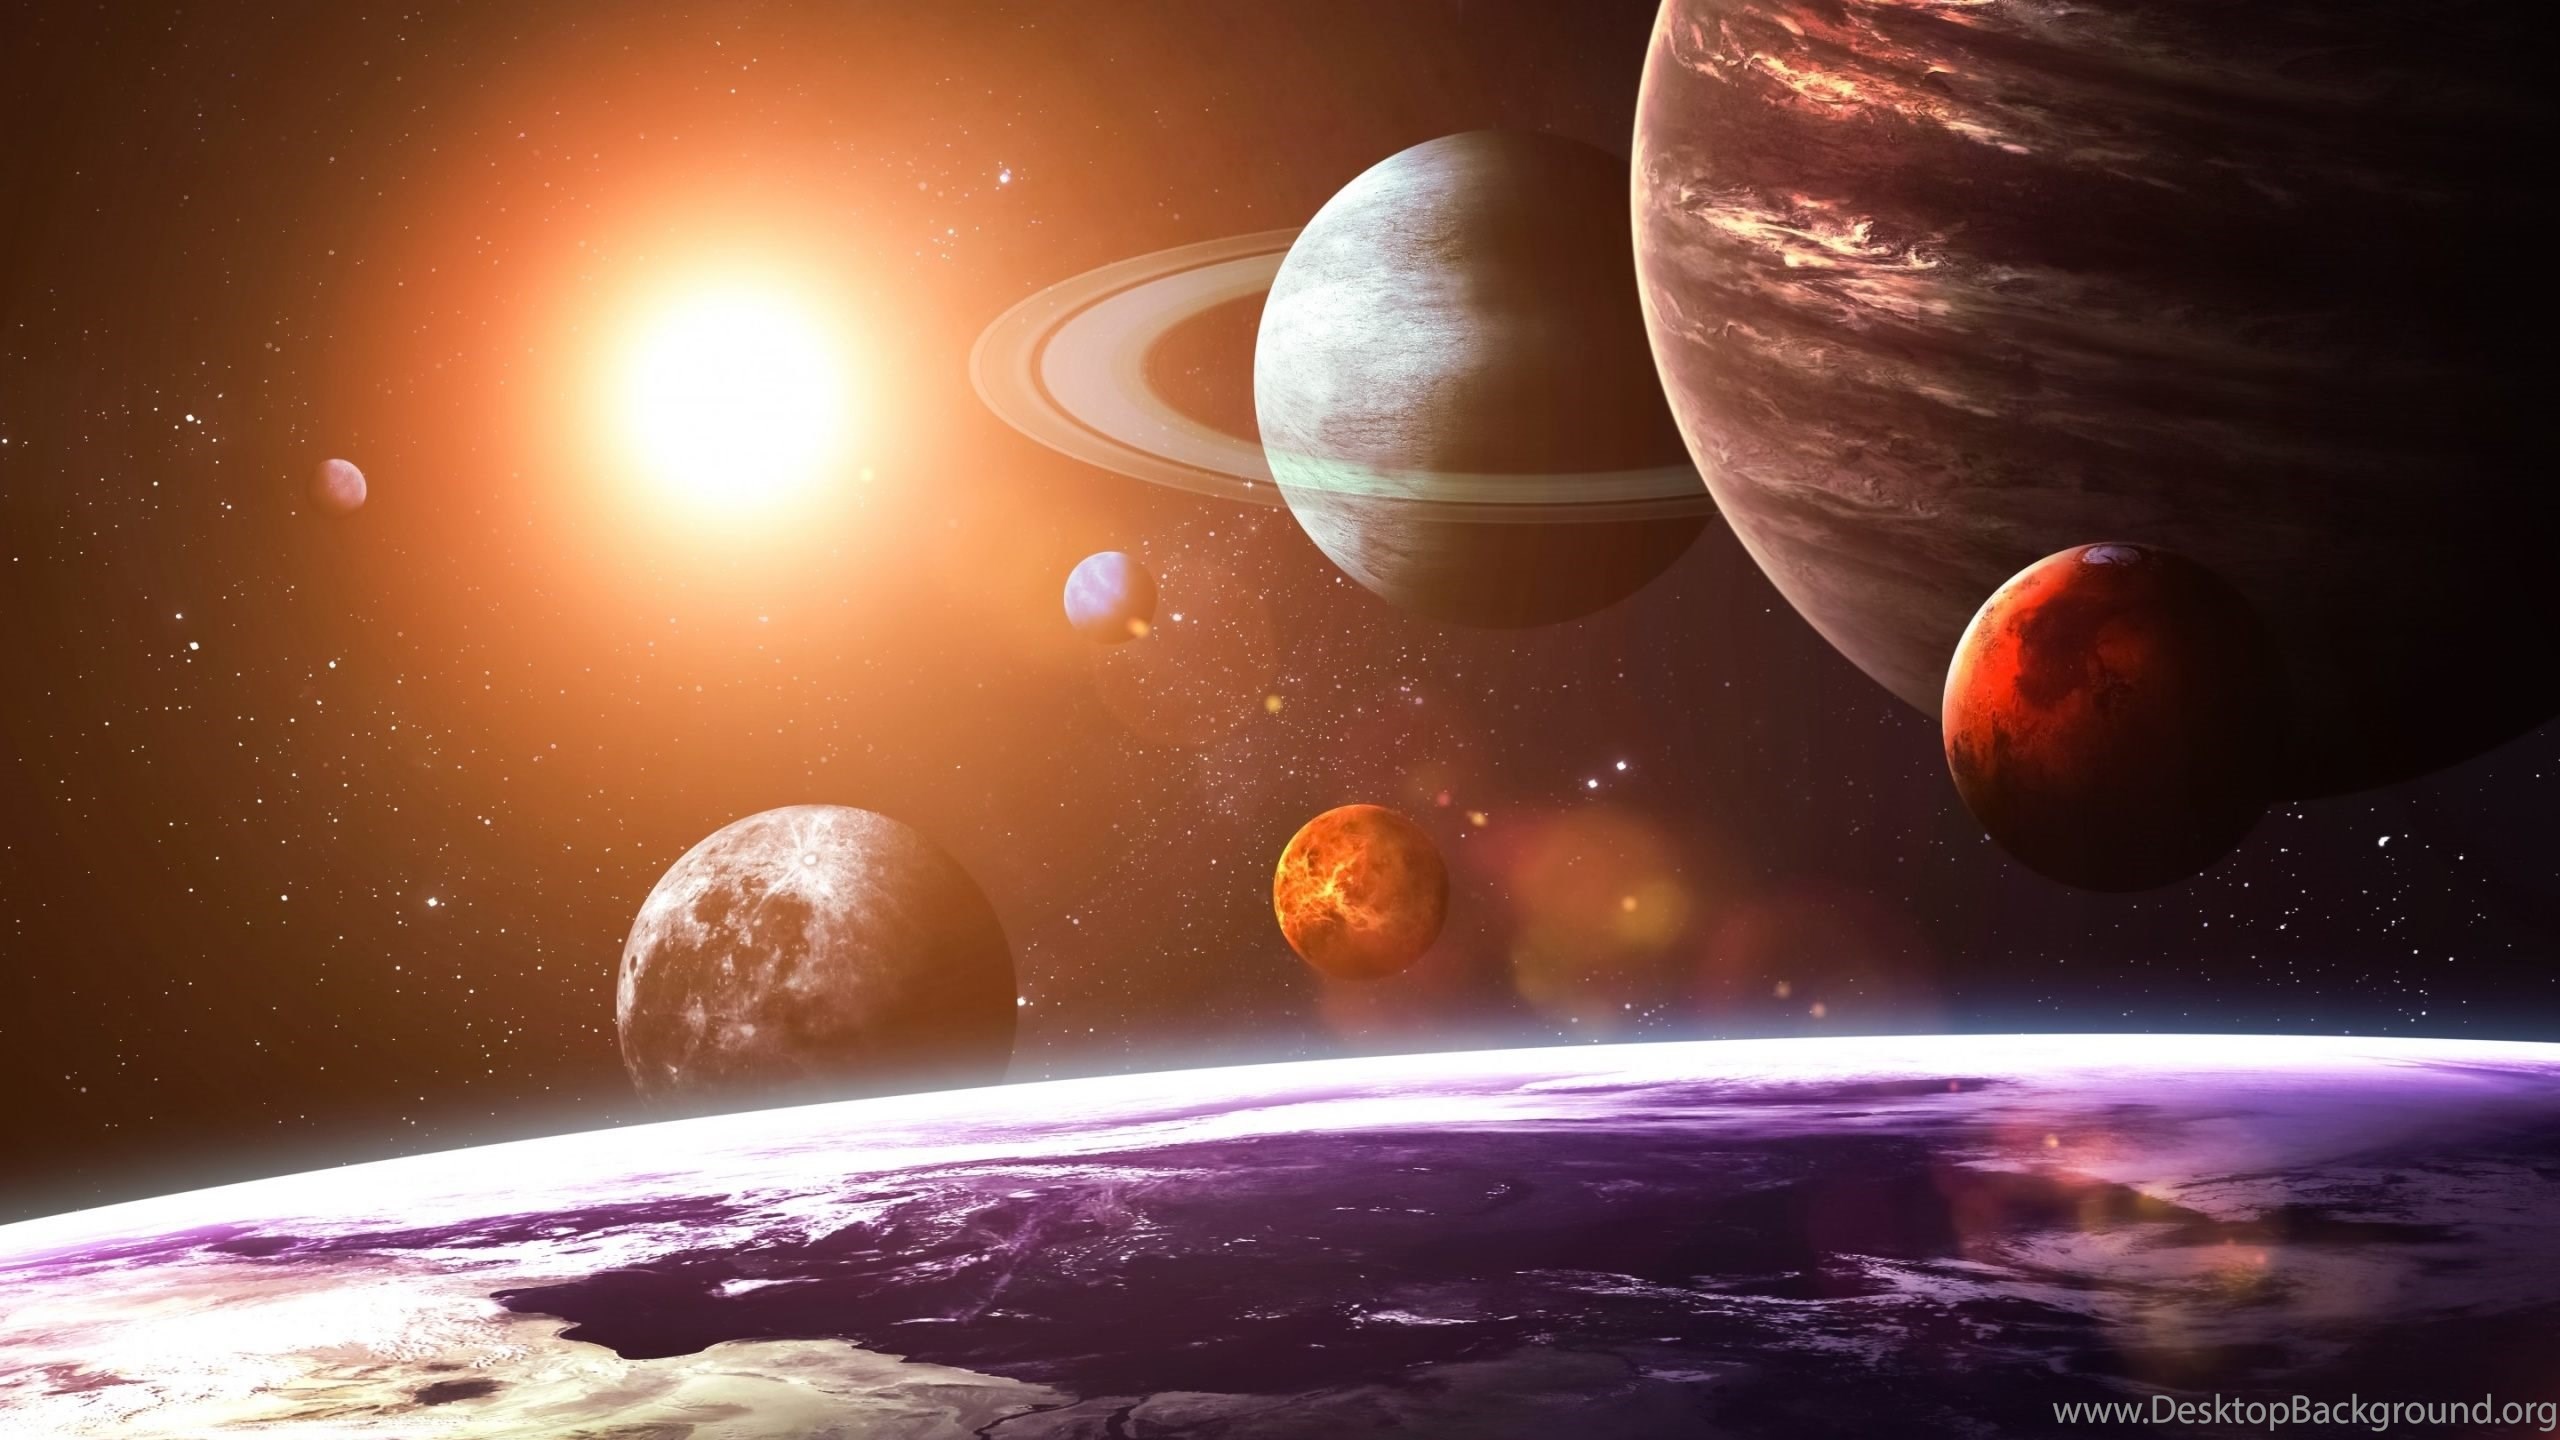 solar system wallpaper,planet,outer space,atmosphere,nature,astronomical object